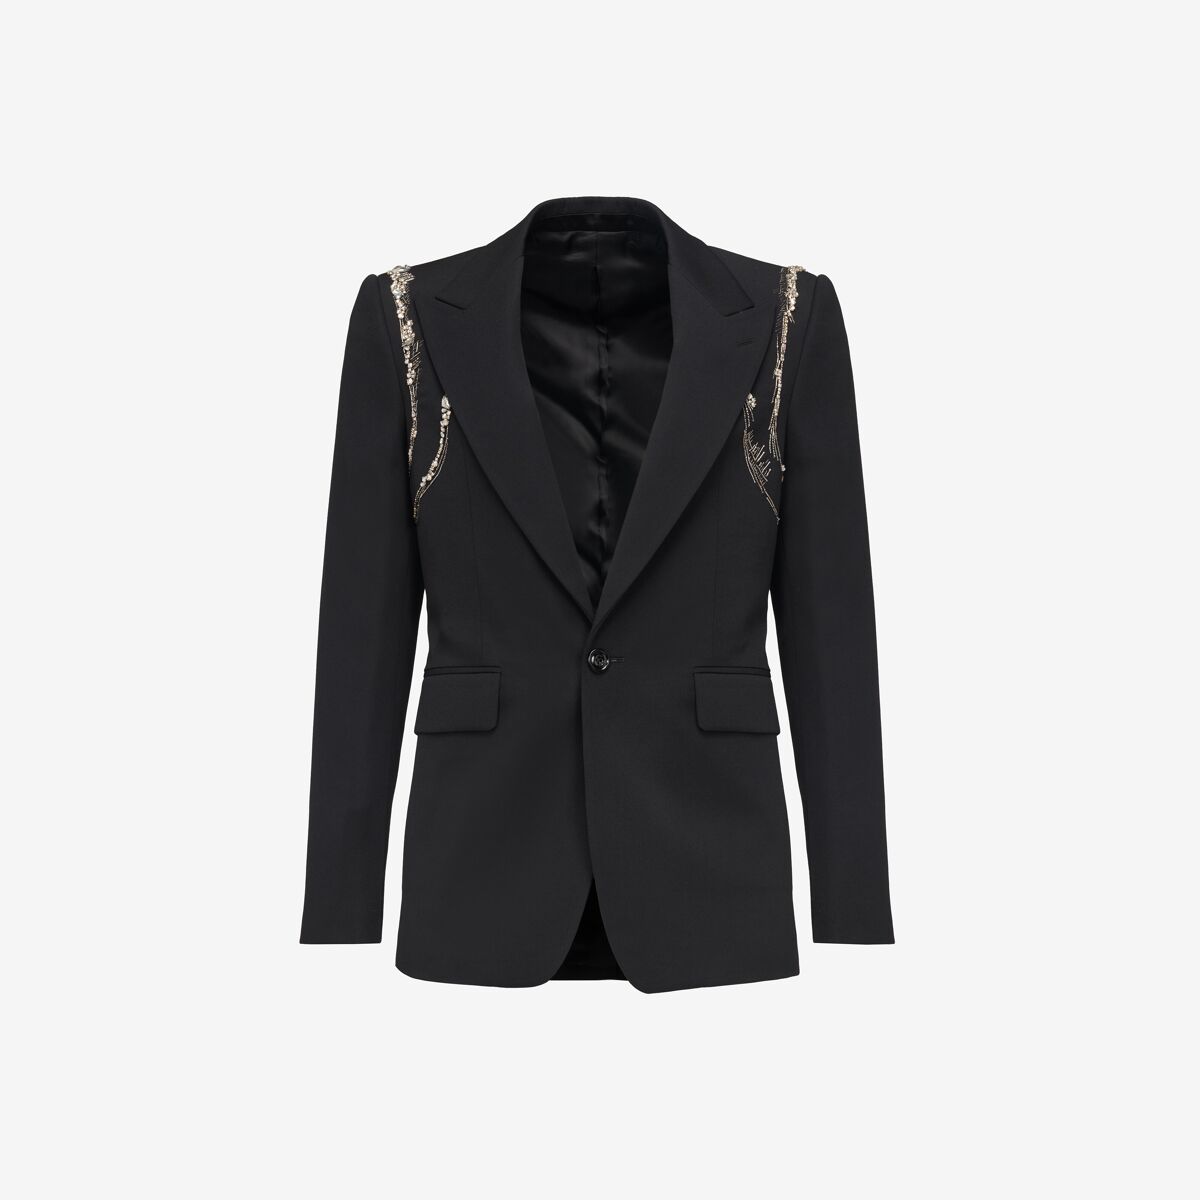 ALEXANDER MCQUEEN CRYSTAL HARNESS SINGLE-BREASTED JACKET